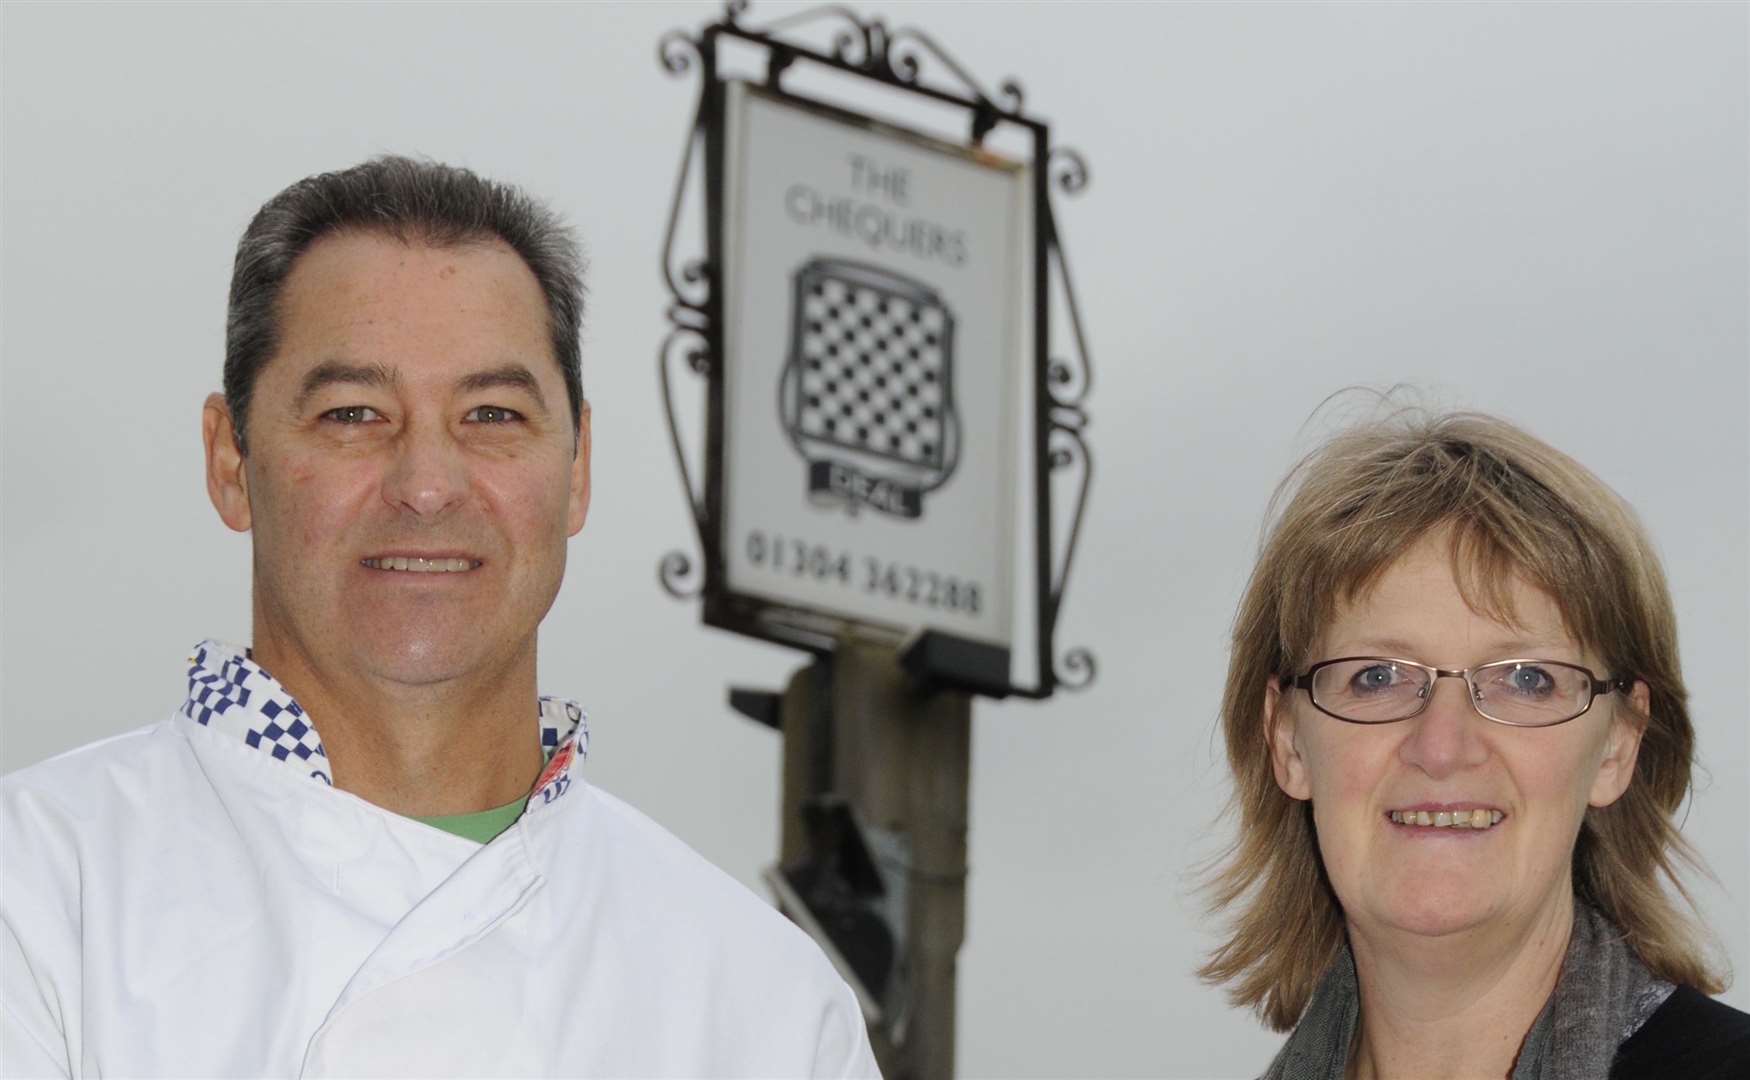 Deal Chequers founders Pieter Van Zyl and Stephanie Hayman in 2013. Picture: Paul Amos